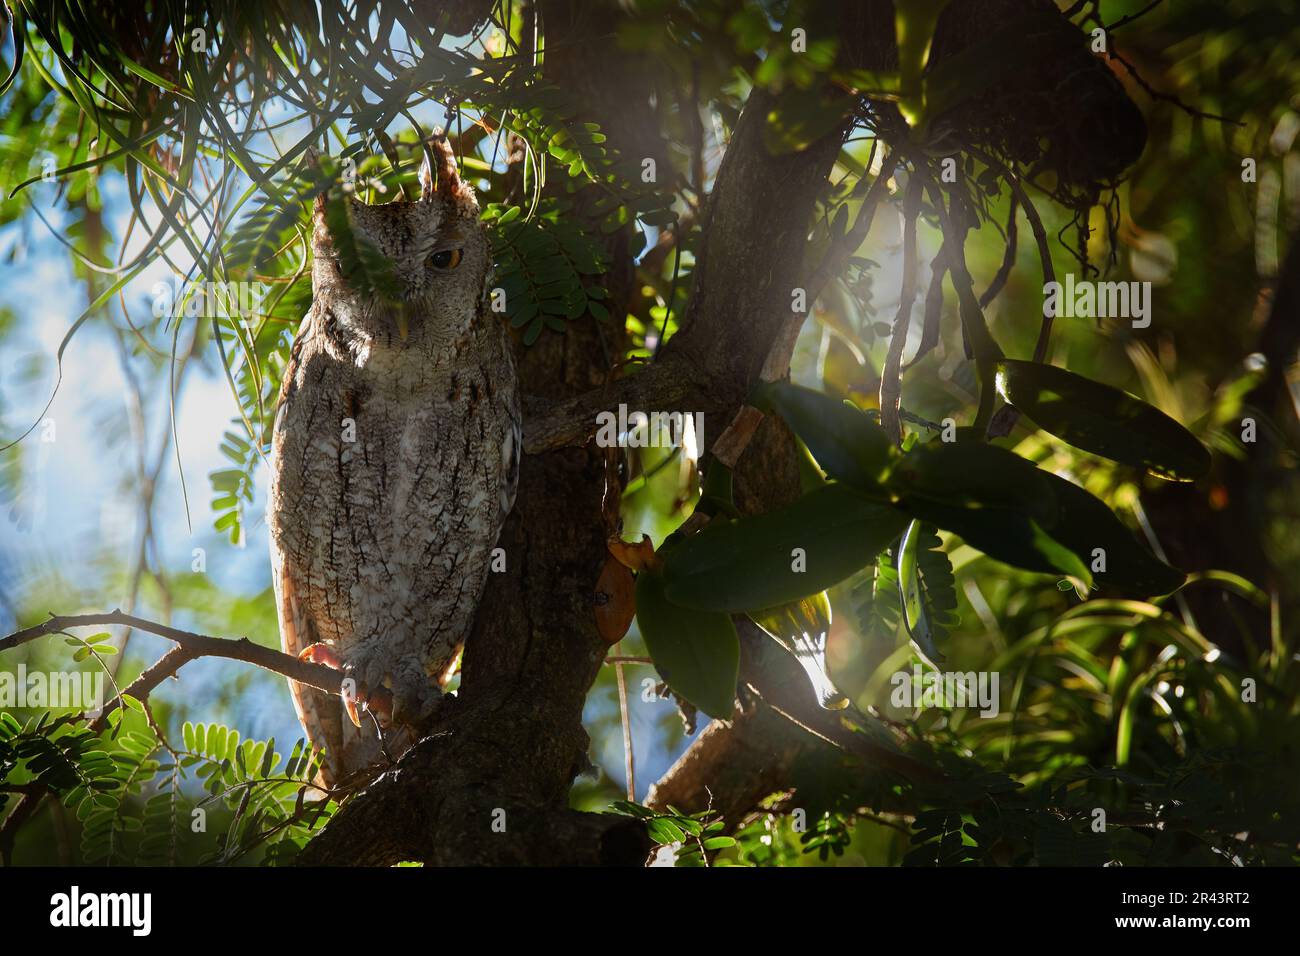 Hidden Pacific Scrrech-owl, Megascops cooperi, in the nature habitat, sitting in the forest, Costa Rica. Funny image from nature. Stock Photo